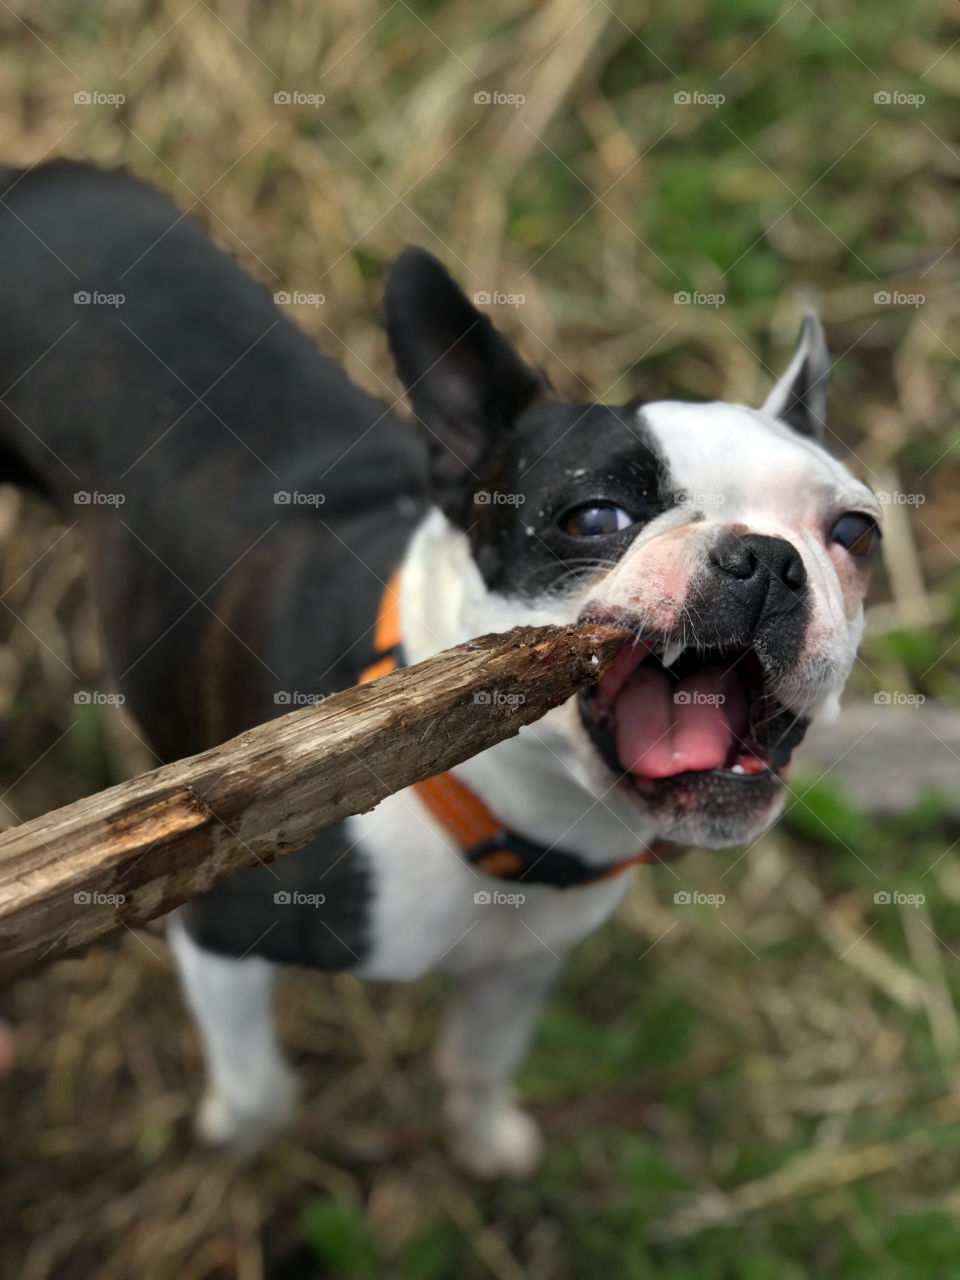 My little pup Boston Terrier loved to play at the beach. Tug of war with sticks of driftwood is one of her favourite games. Or she just likes to chew the wood to splinters. I never understand why her mouth isnt full of splinters!